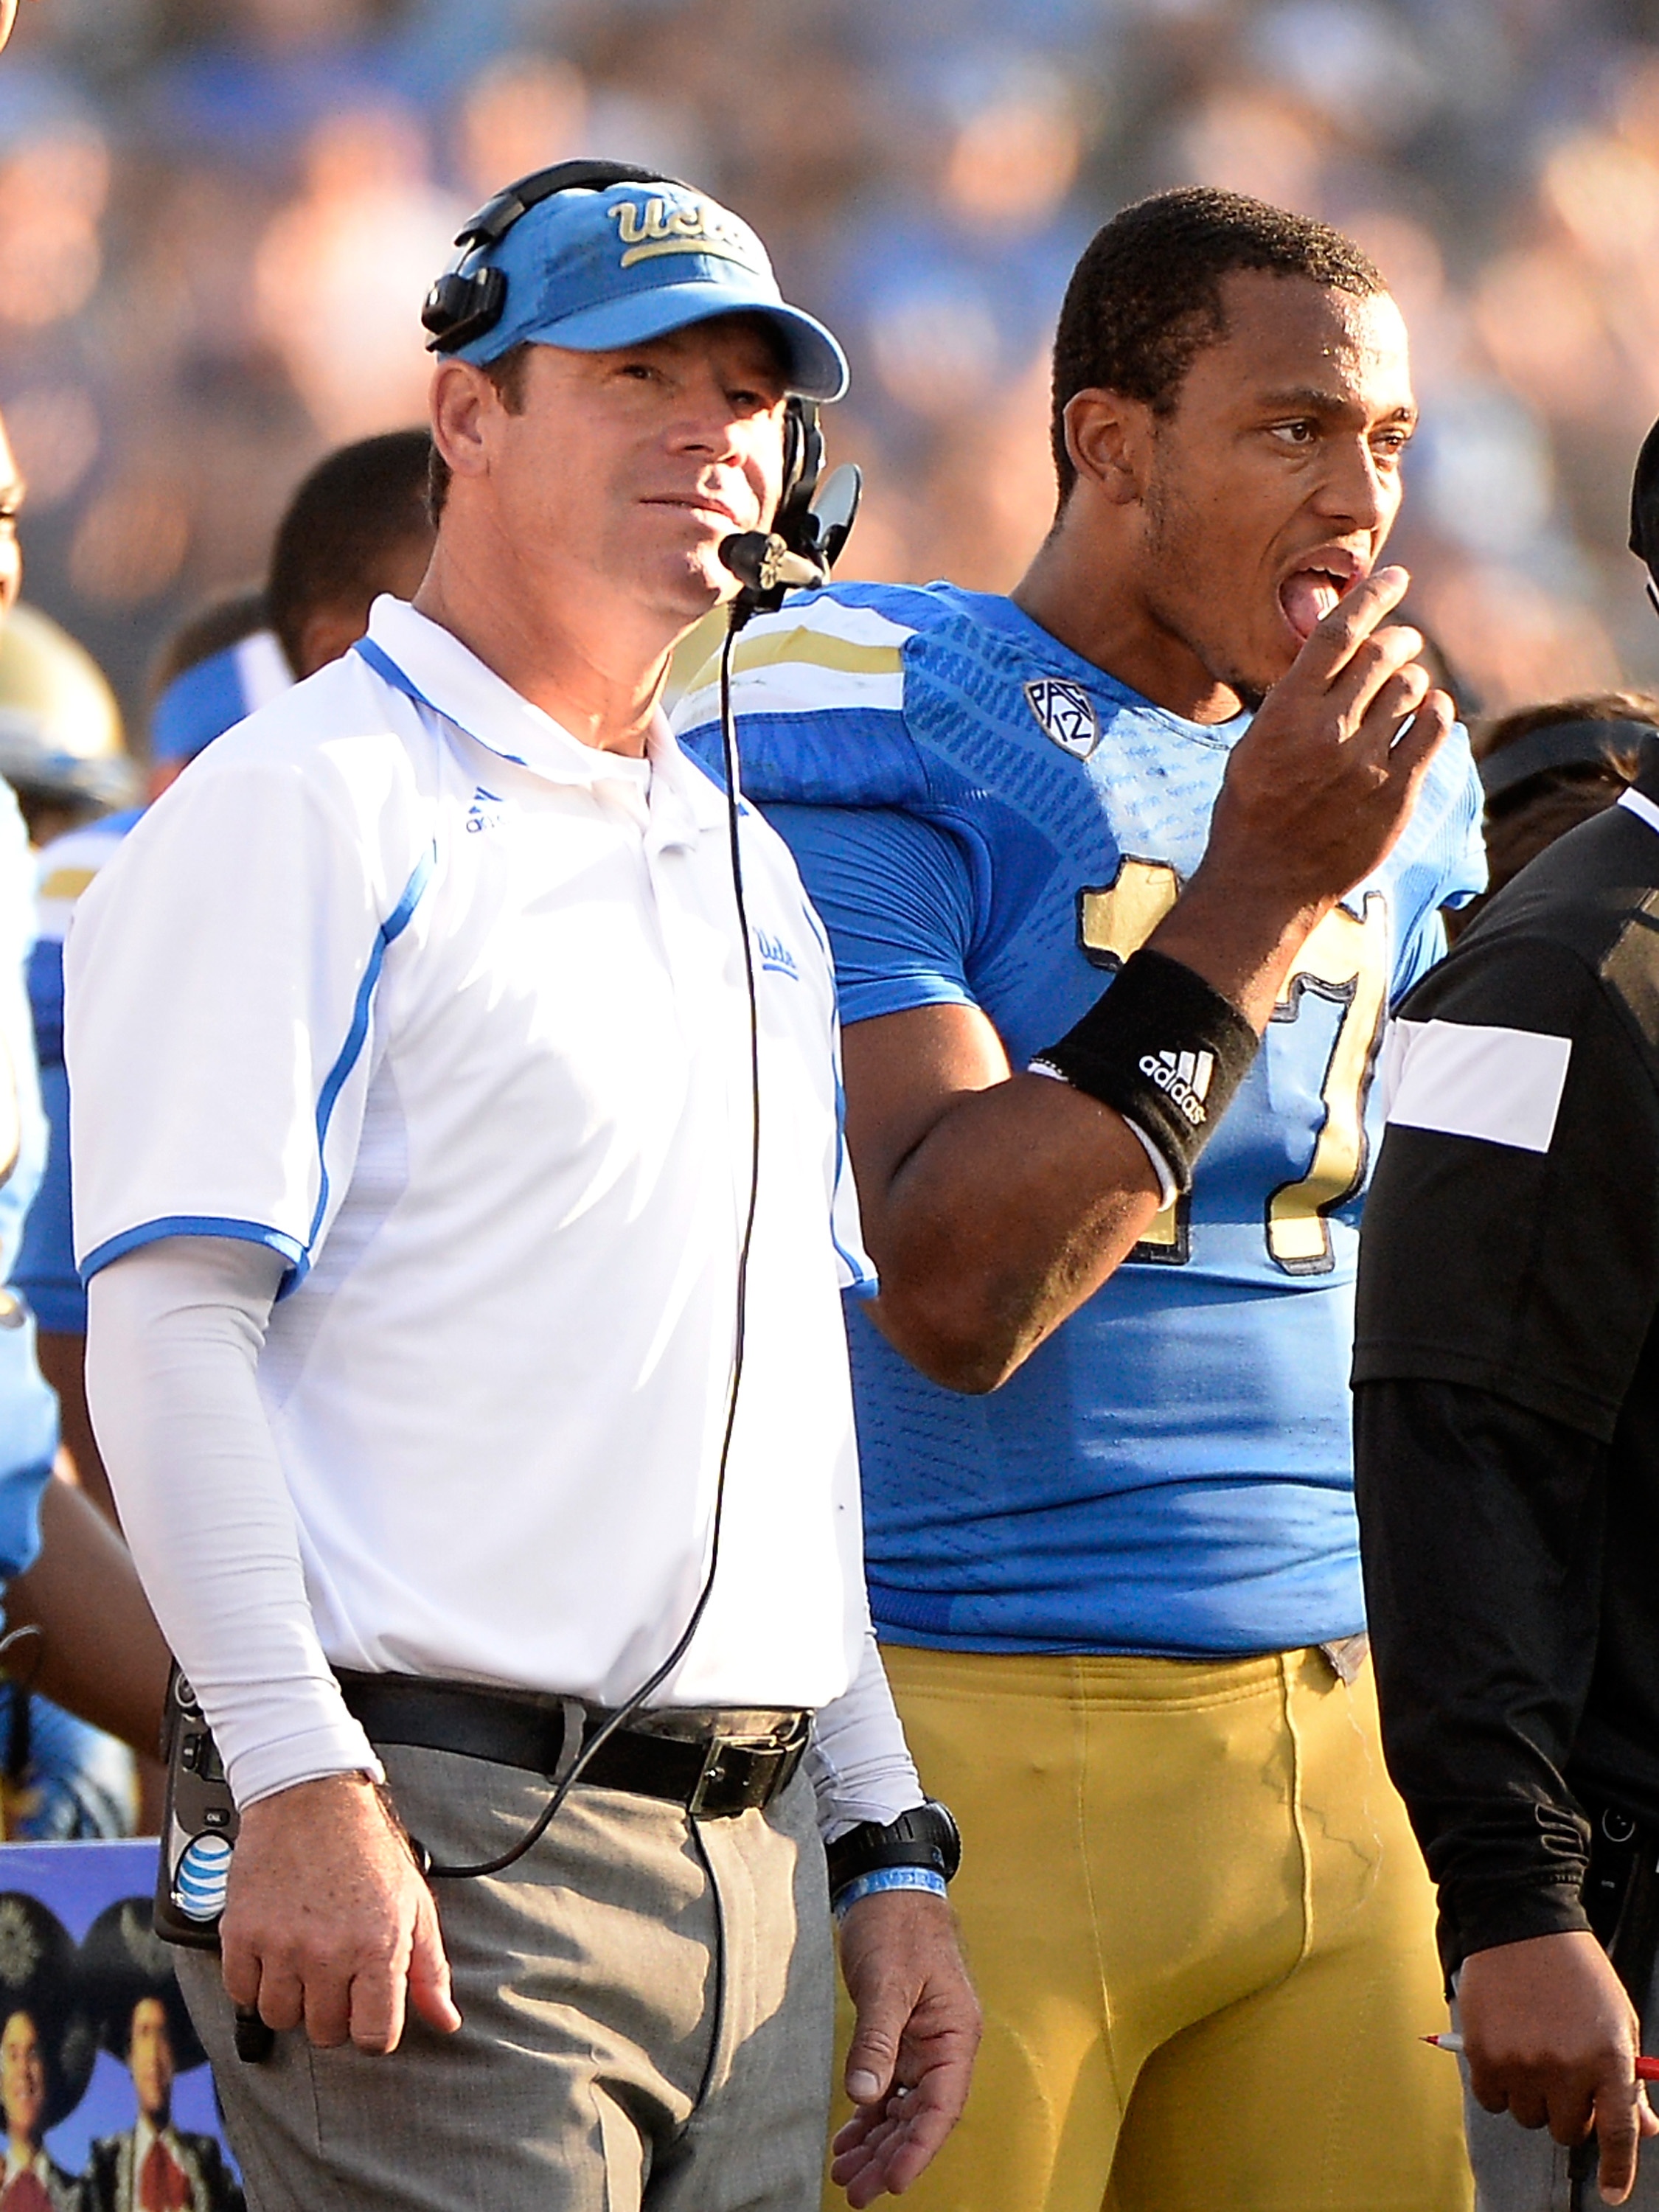 PASADENA, CA - NOVEMBER 28: Brett Hundley #17 of the UCLA Bruins and head coach Jim Mora watch a 31-10 loss to the Stanford Cardinal at Rose Bowl on November 28, 2014 in Pasadena, California. (Photo by Harry How/Getty Images)